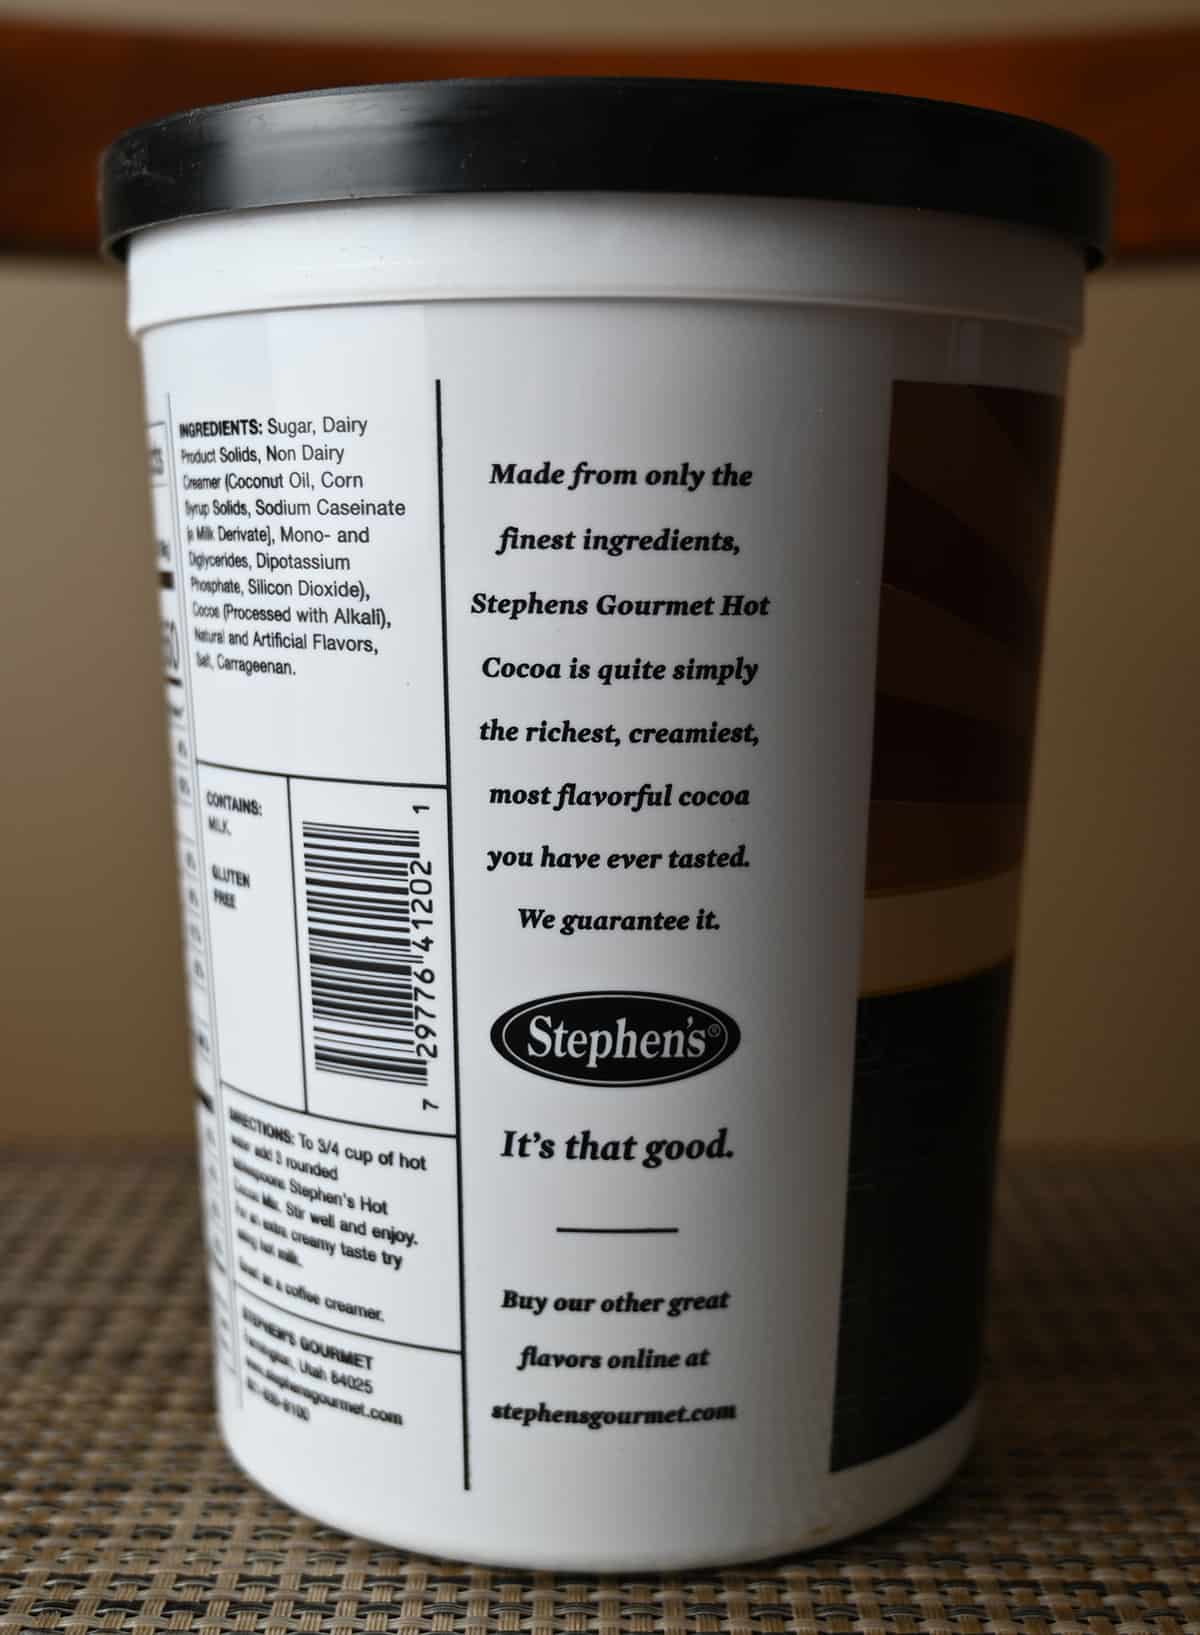 Image of the product description for the hot cocoa from the back of the tub.